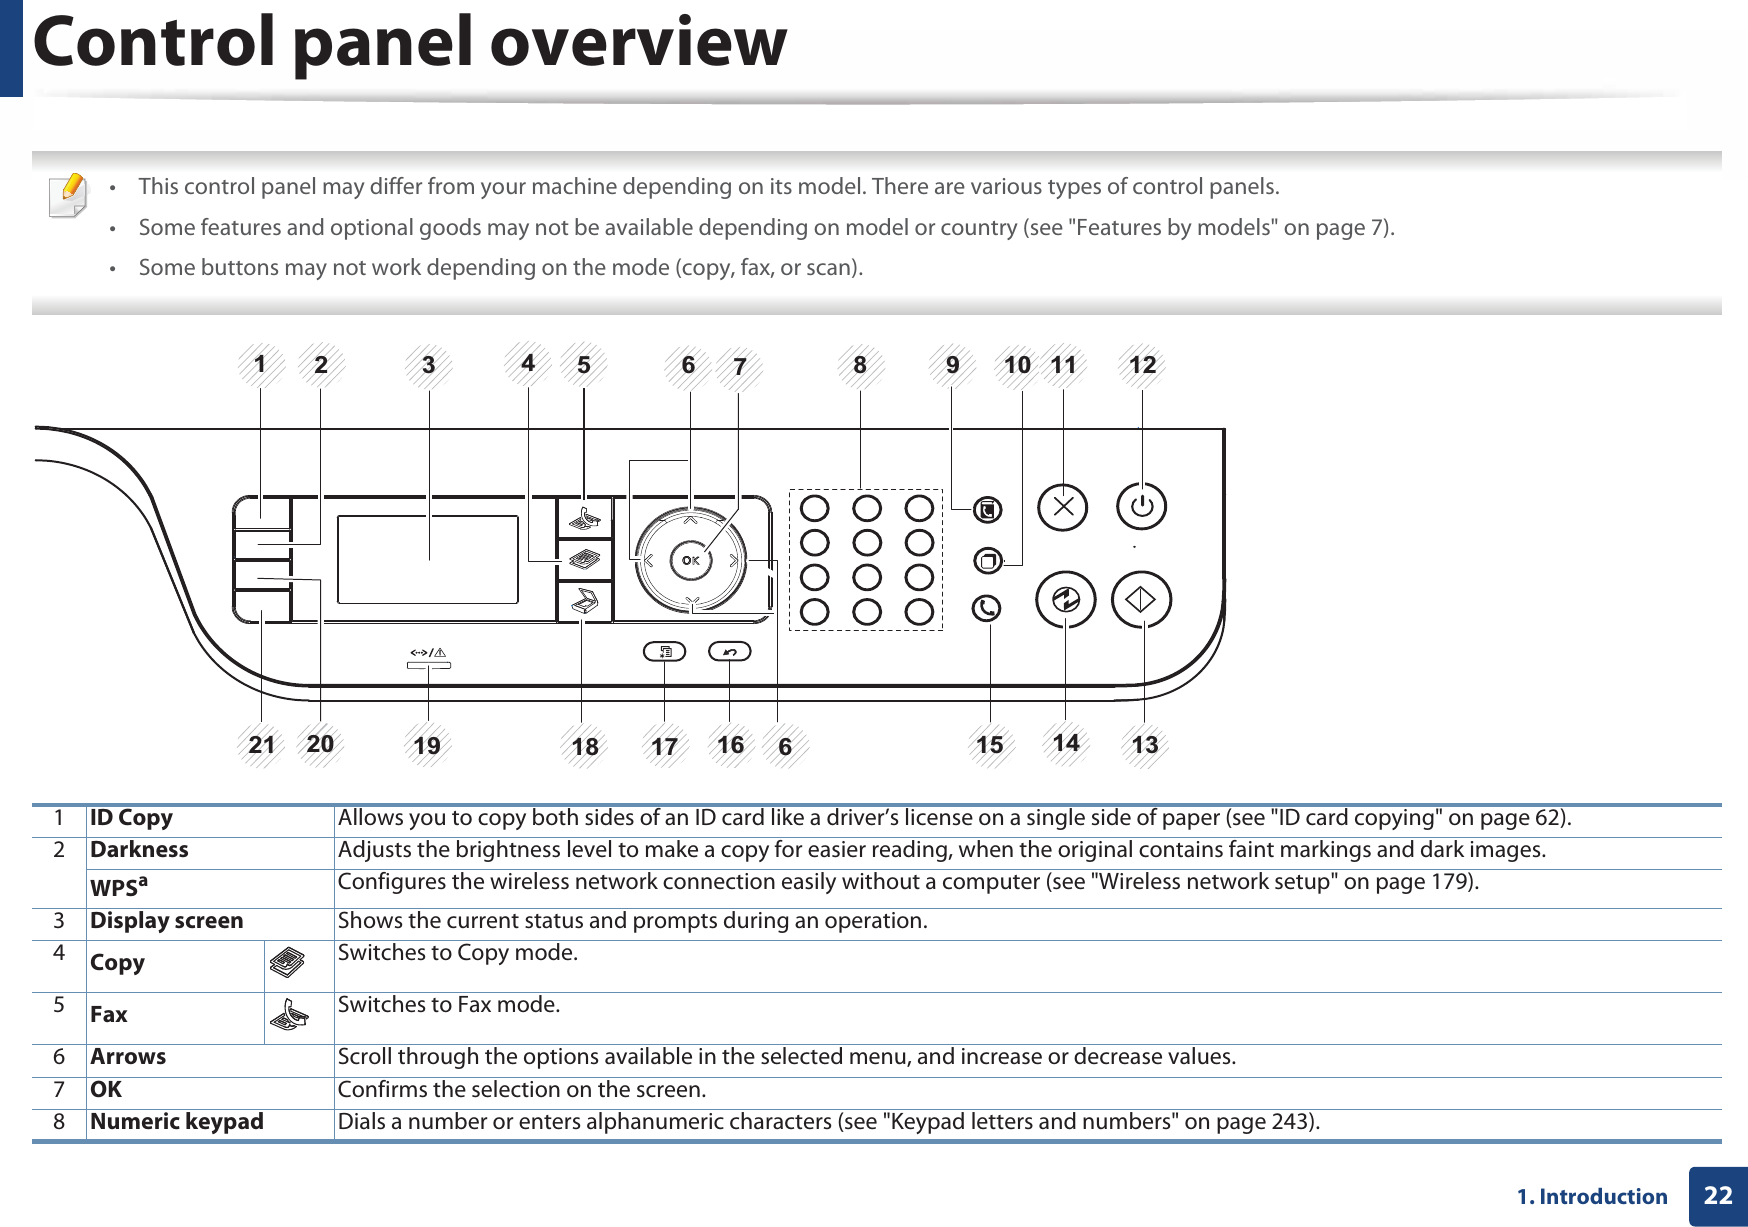 221. IntroductionControl panel overview • This control panel may differ from your machine depending on its model. There are various types of control panels.• Some features and optional goods may not be available depending on model or country (see &quot;Features by models&quot; on page 7).• Some buttons may not work depending on the mode (copy, fax, or scan).  1ID Copy Allows you to copy both sides of an ID card like a driver’s license on a single side of paper (see &quot;ID card copying&quot; on page 62). 2Darkness Adjusts the brightness level to make a copy for easier reading, when the original contains faint markings and dark images.WPSaConfigures the wireless network connection easily without a computer (see &quot;Wireless network setup&quot; on page 179).3Display screen Shows the current status and prompts during an operation.4Copy Switches to Copy mode. 5Fax Switches to Fax mode. 6Arrows Scroll through the options available in the selected menu, and increase or decrease values.7OK Confirms the selection on the screen. 8Numeric keypad Dials a number or enters alphanumeric characters (see &quot;Keypad letters and numbers&quot; on page 243).61221345 6 78 9 10 1121 20 19 18 17 16 15 14 13